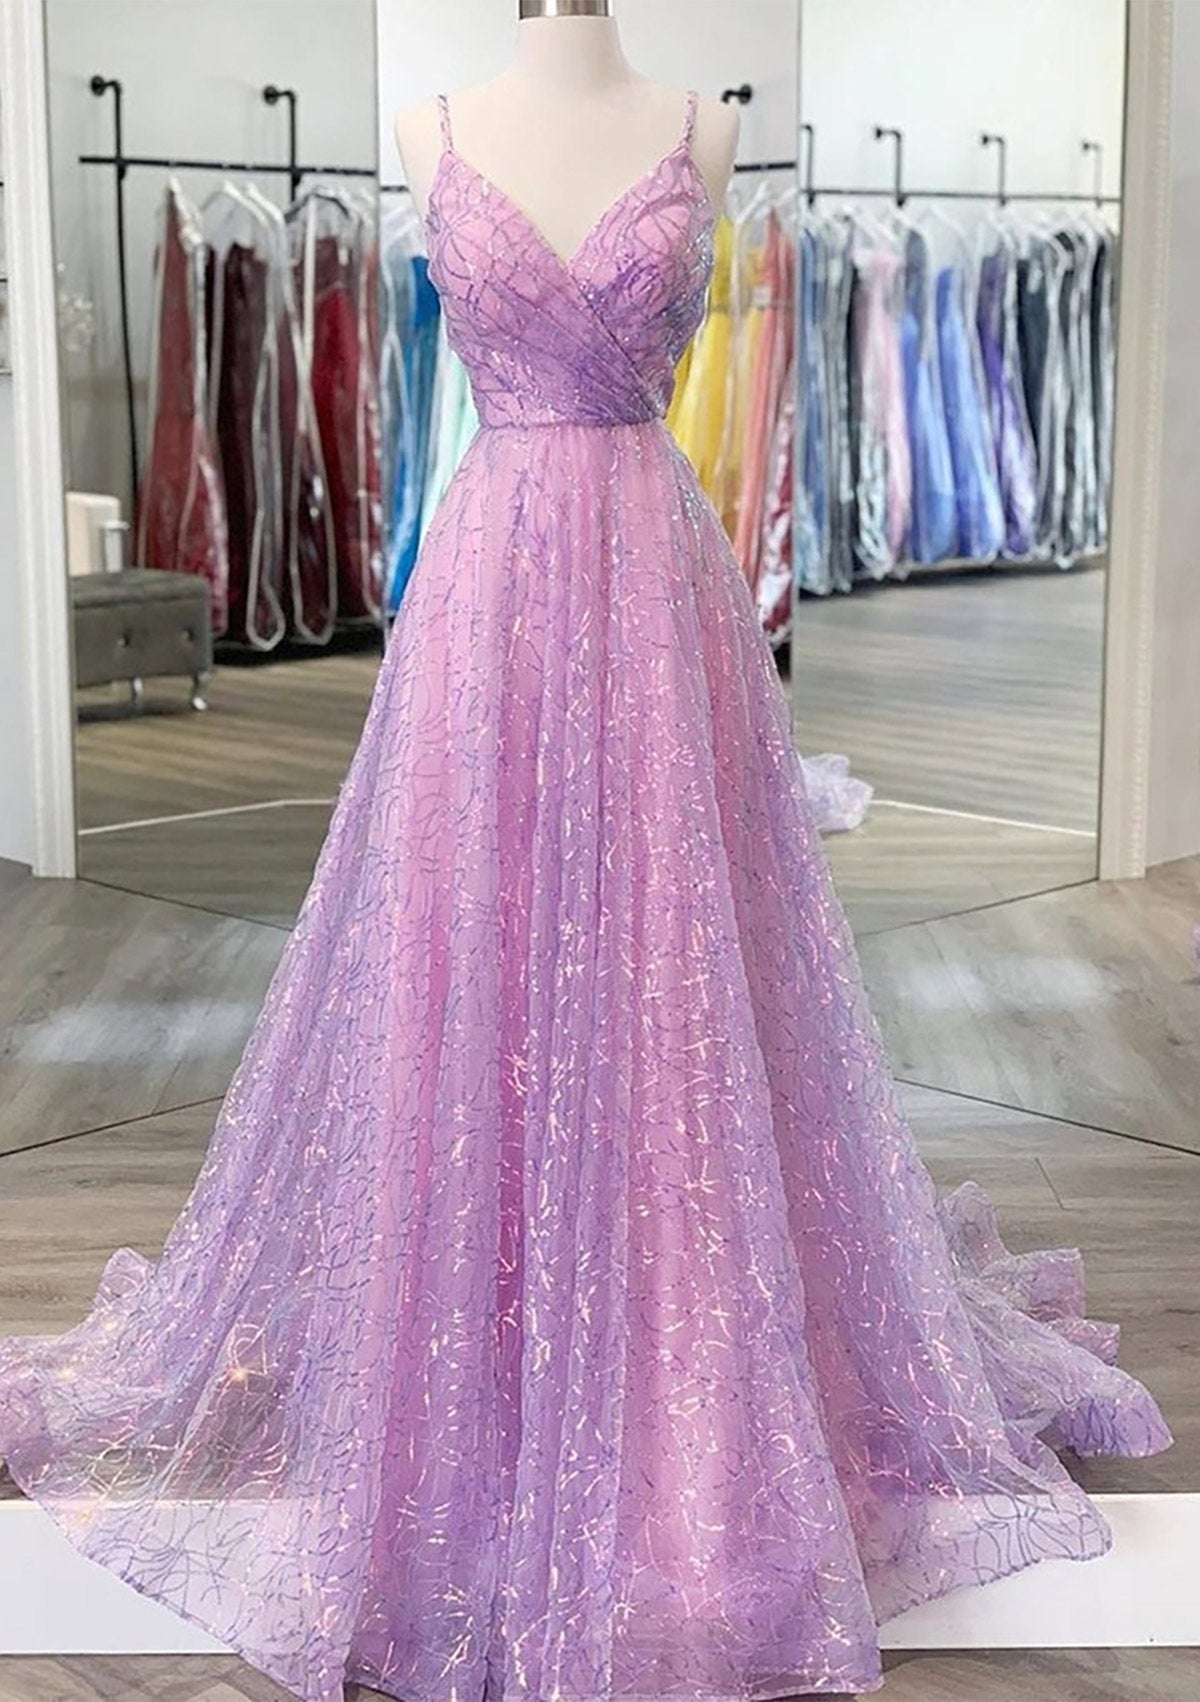 Unique Prom Dresses, A-line V Neck Spaghetti Straps Sweep Train Sequined Prom Dress With Pleated